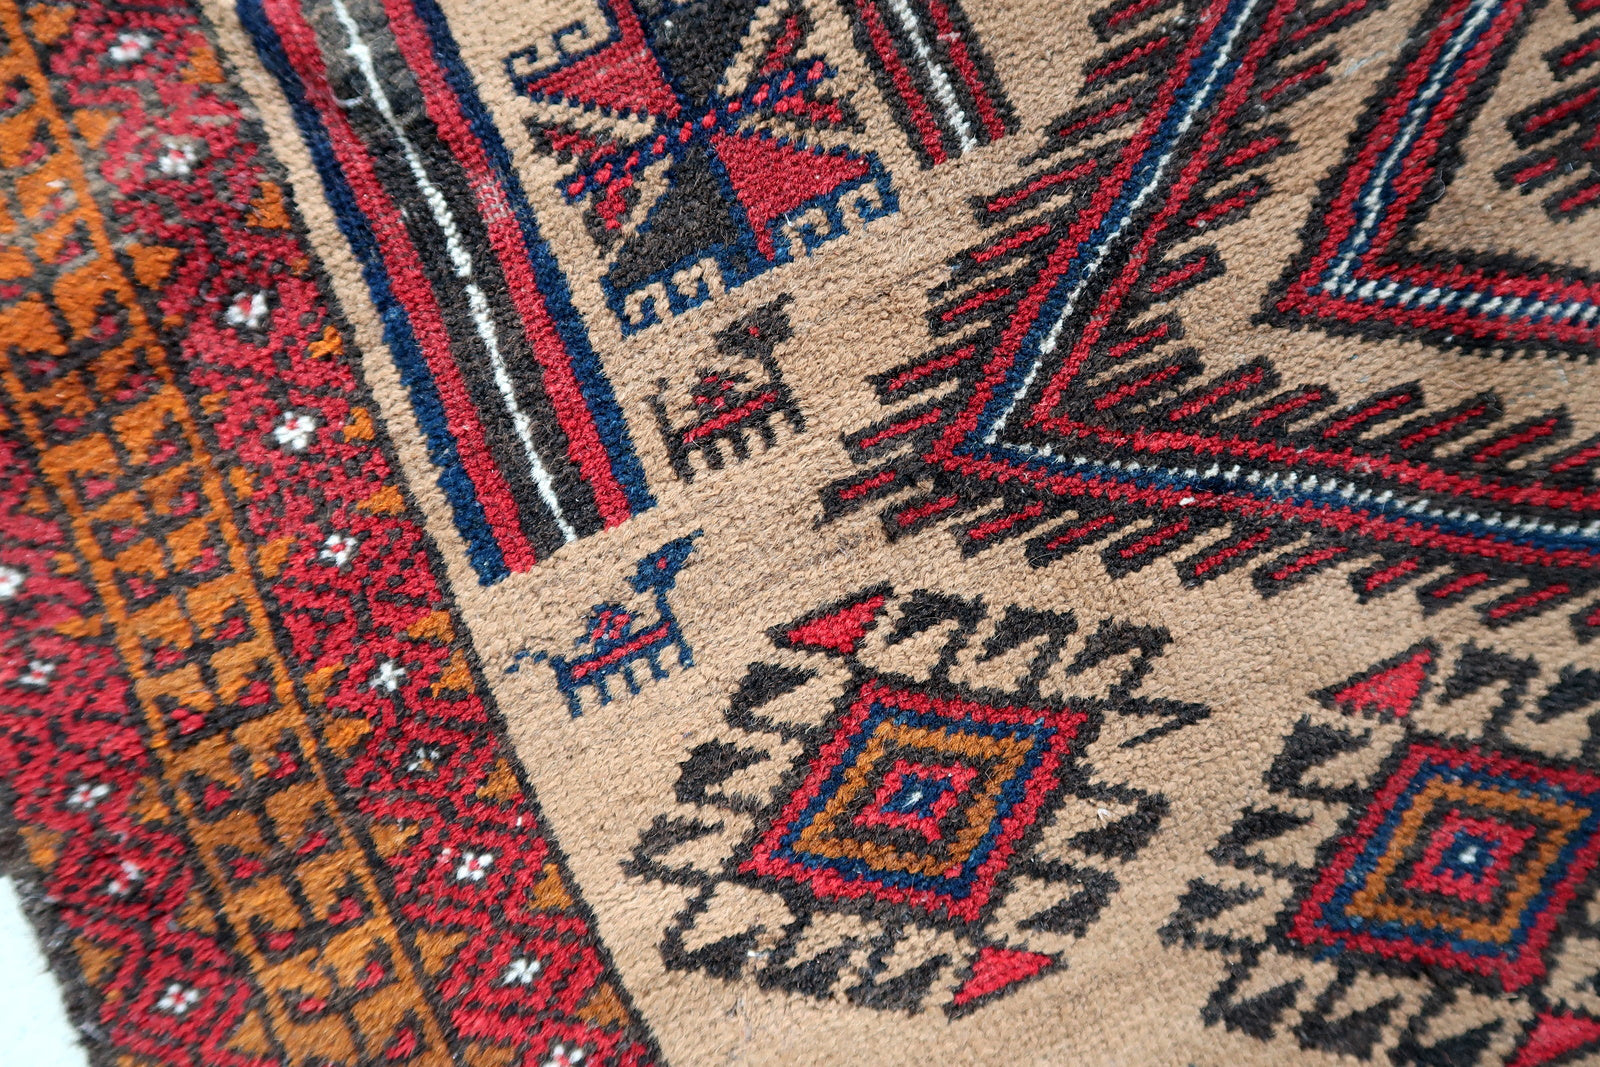 Handmade antique Afghan Baluch rug in tribal prayer design. The rug is from the beginning of 20th century in original condition, it has some low pile.